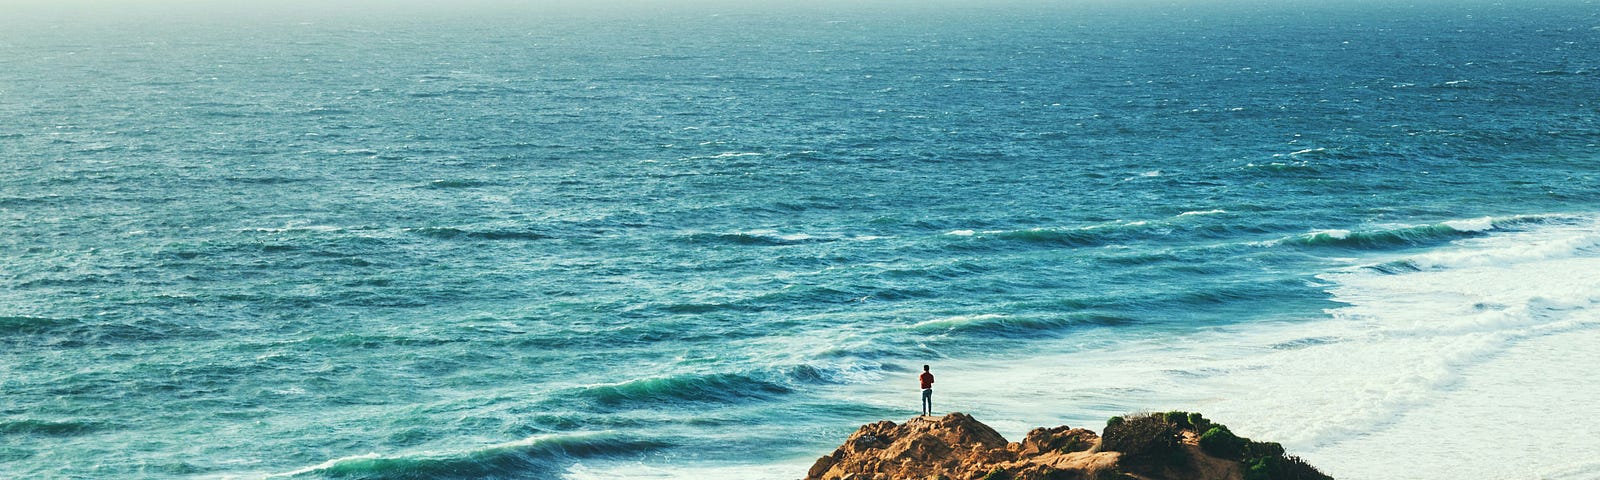 Person standing alone on the edge of a cliff, looking out to the ocean